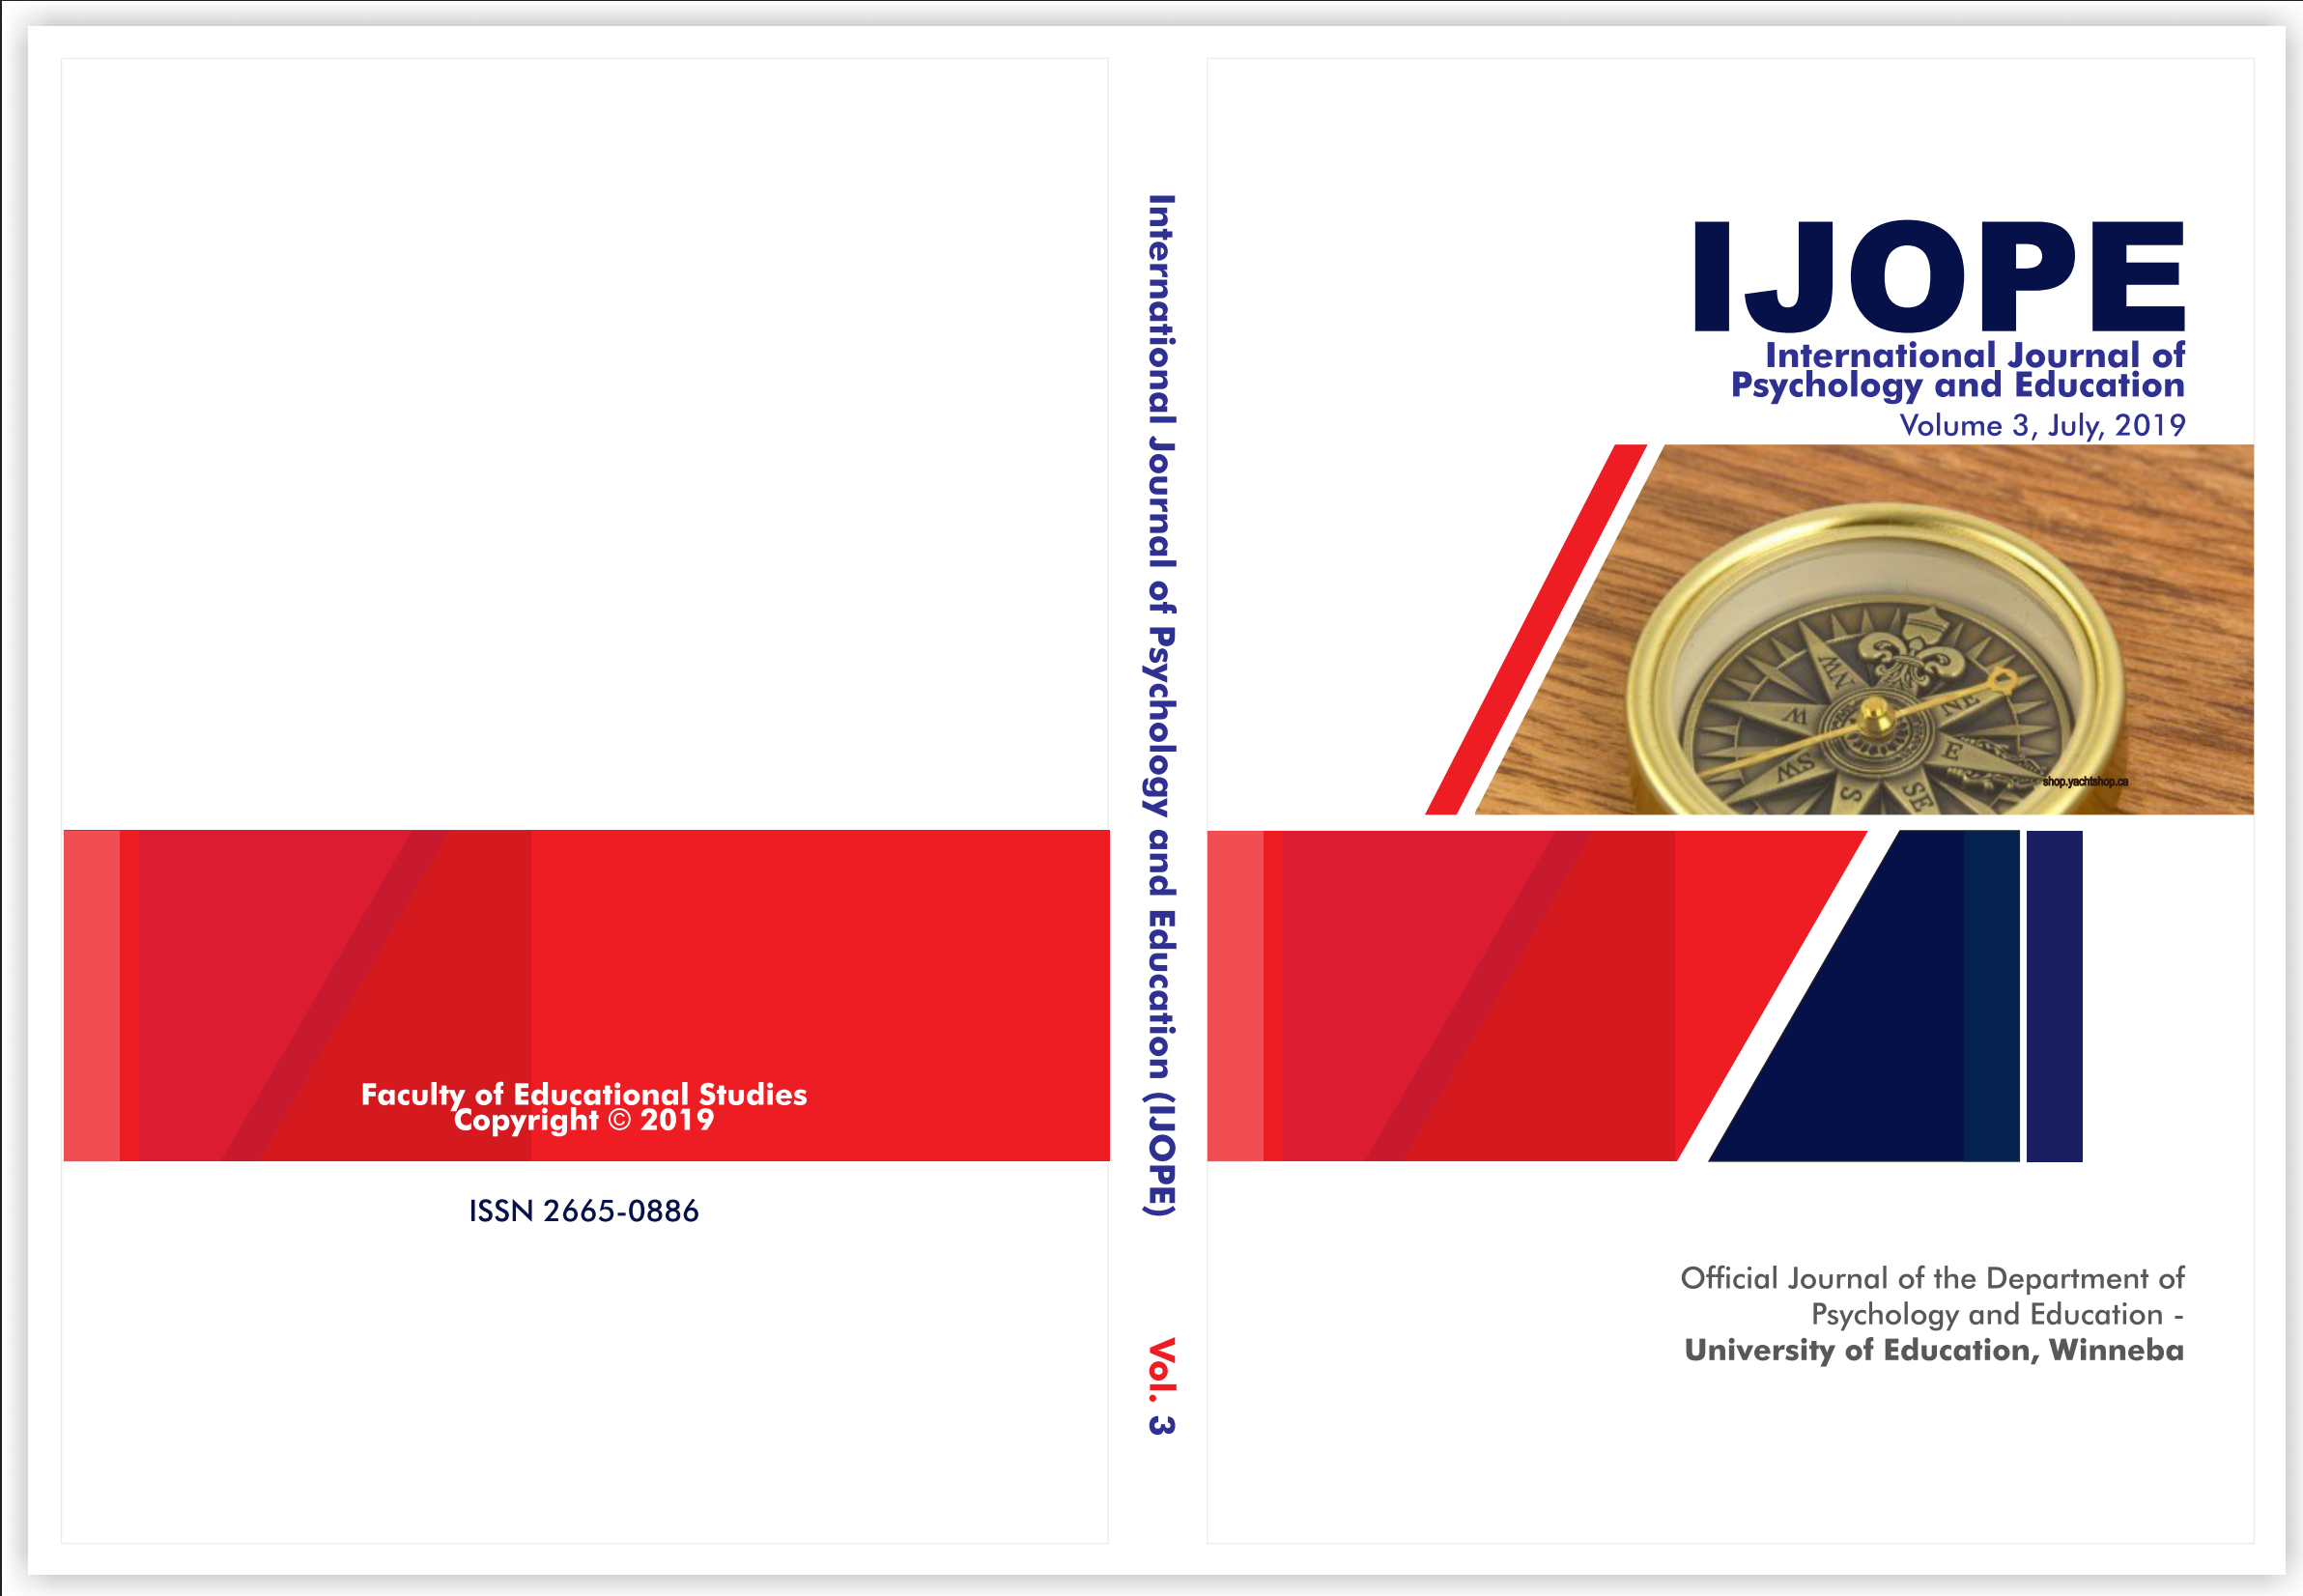 					View Vol. 4 No. 4 (2020): Fourth Volume: International Journal of Psychology and Education
				